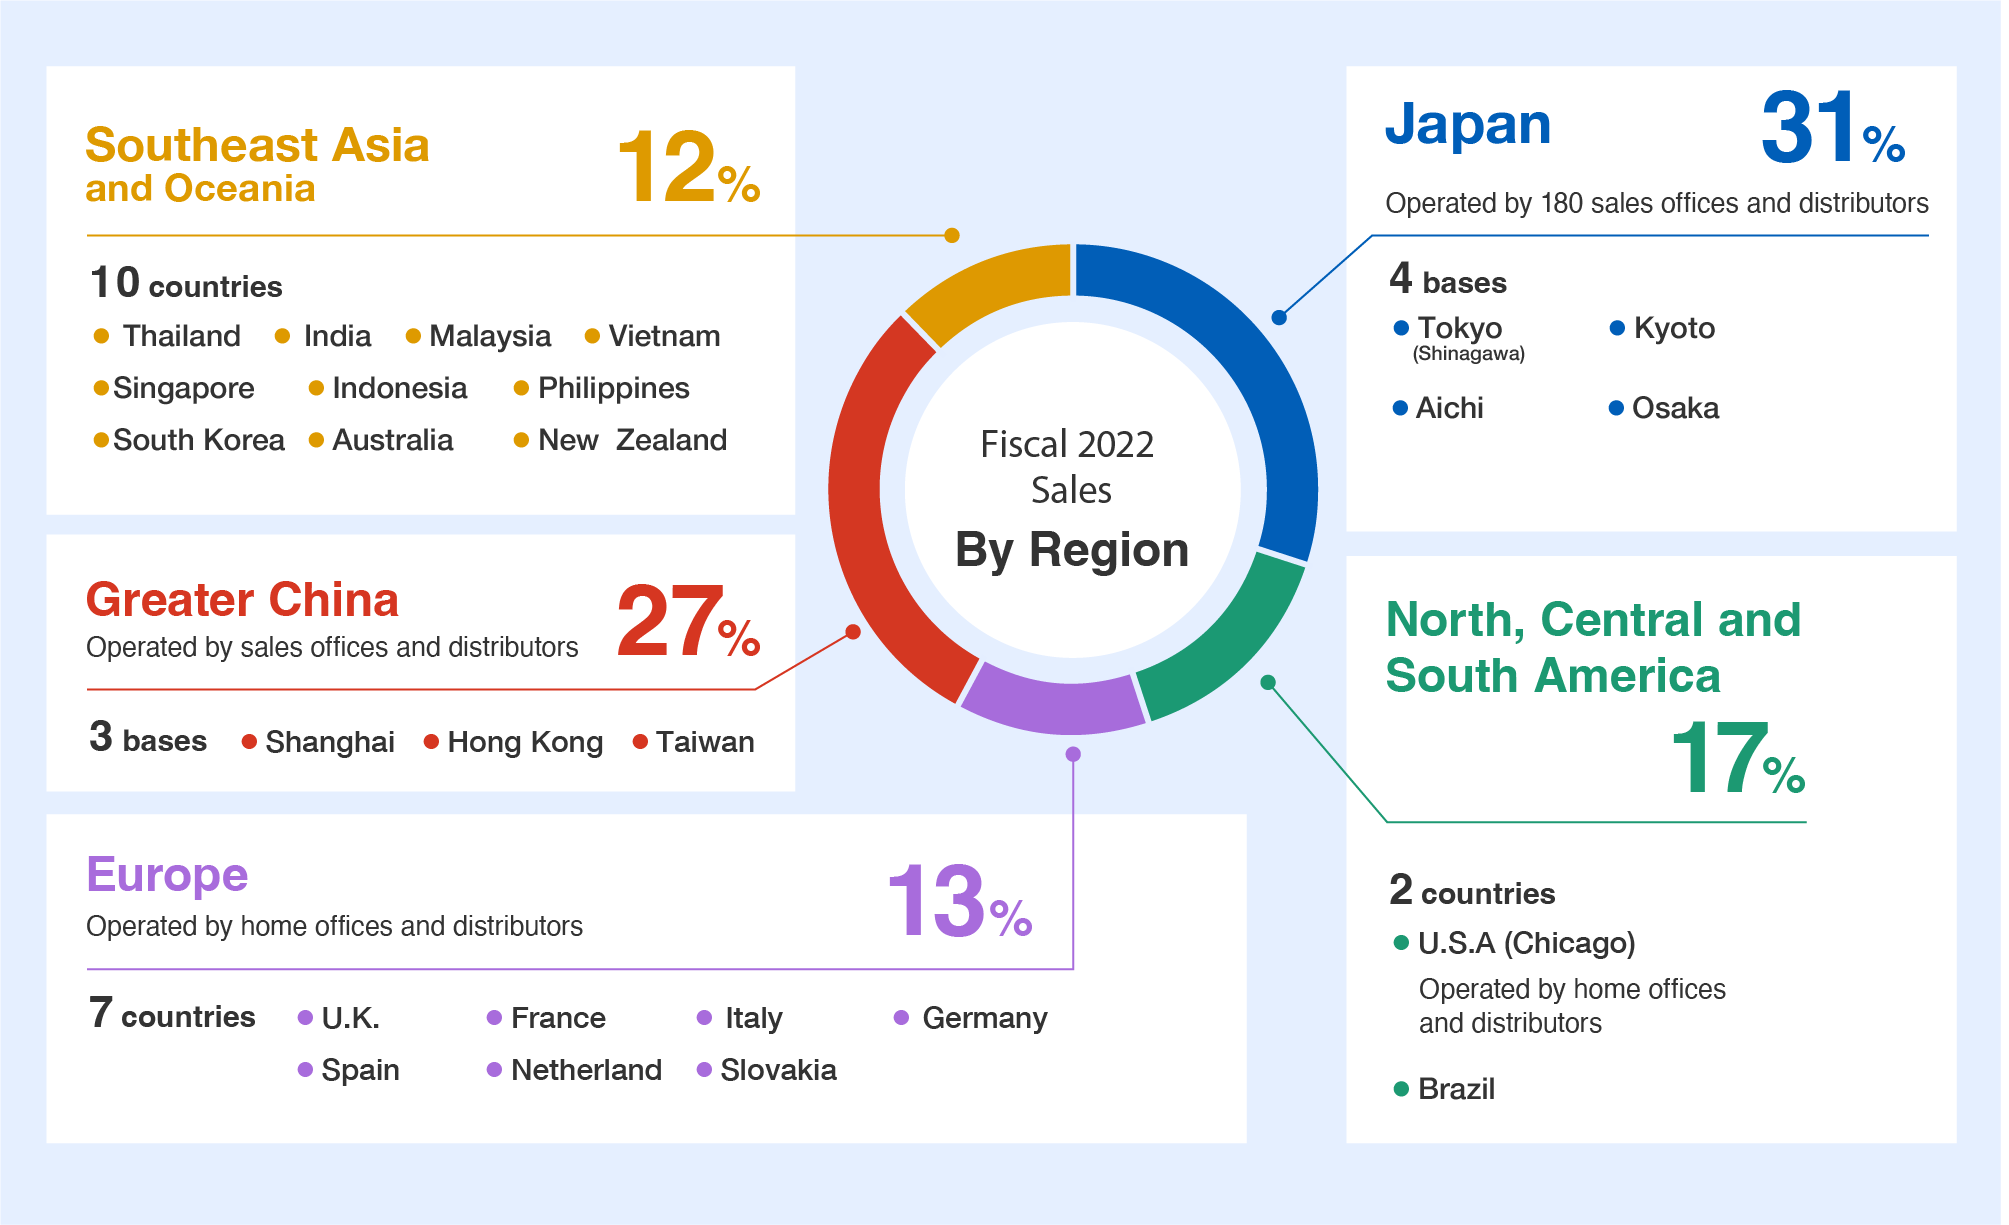 Fiscal 2022 Net sales By region: Southeast Asia and Oceania 12％ 10 countries (Thailand, India, Malaysia, South Korea, Singapore, Indonesia, Philippines, Vietnam, Australia, New Zealand), Greater China Operated by sales offices and distributors 27％ 3 bases (Shanghai, Hong Kong, Taiwan), Europe Operated by home offices and distributors 13％ 7 countries (U.K., France, Italy, Netherlands, Germany, Spain, Slovakia), Japan Operated by 180 sales offices and distributors 31％ 4 bases {Tokyo(Shinagawa), Kyoto, Aichi, Osaka}, North, Central and South America 17％ 2 countries {U.S.A (Chicago) Operated by home offices and distributors, Brazil}